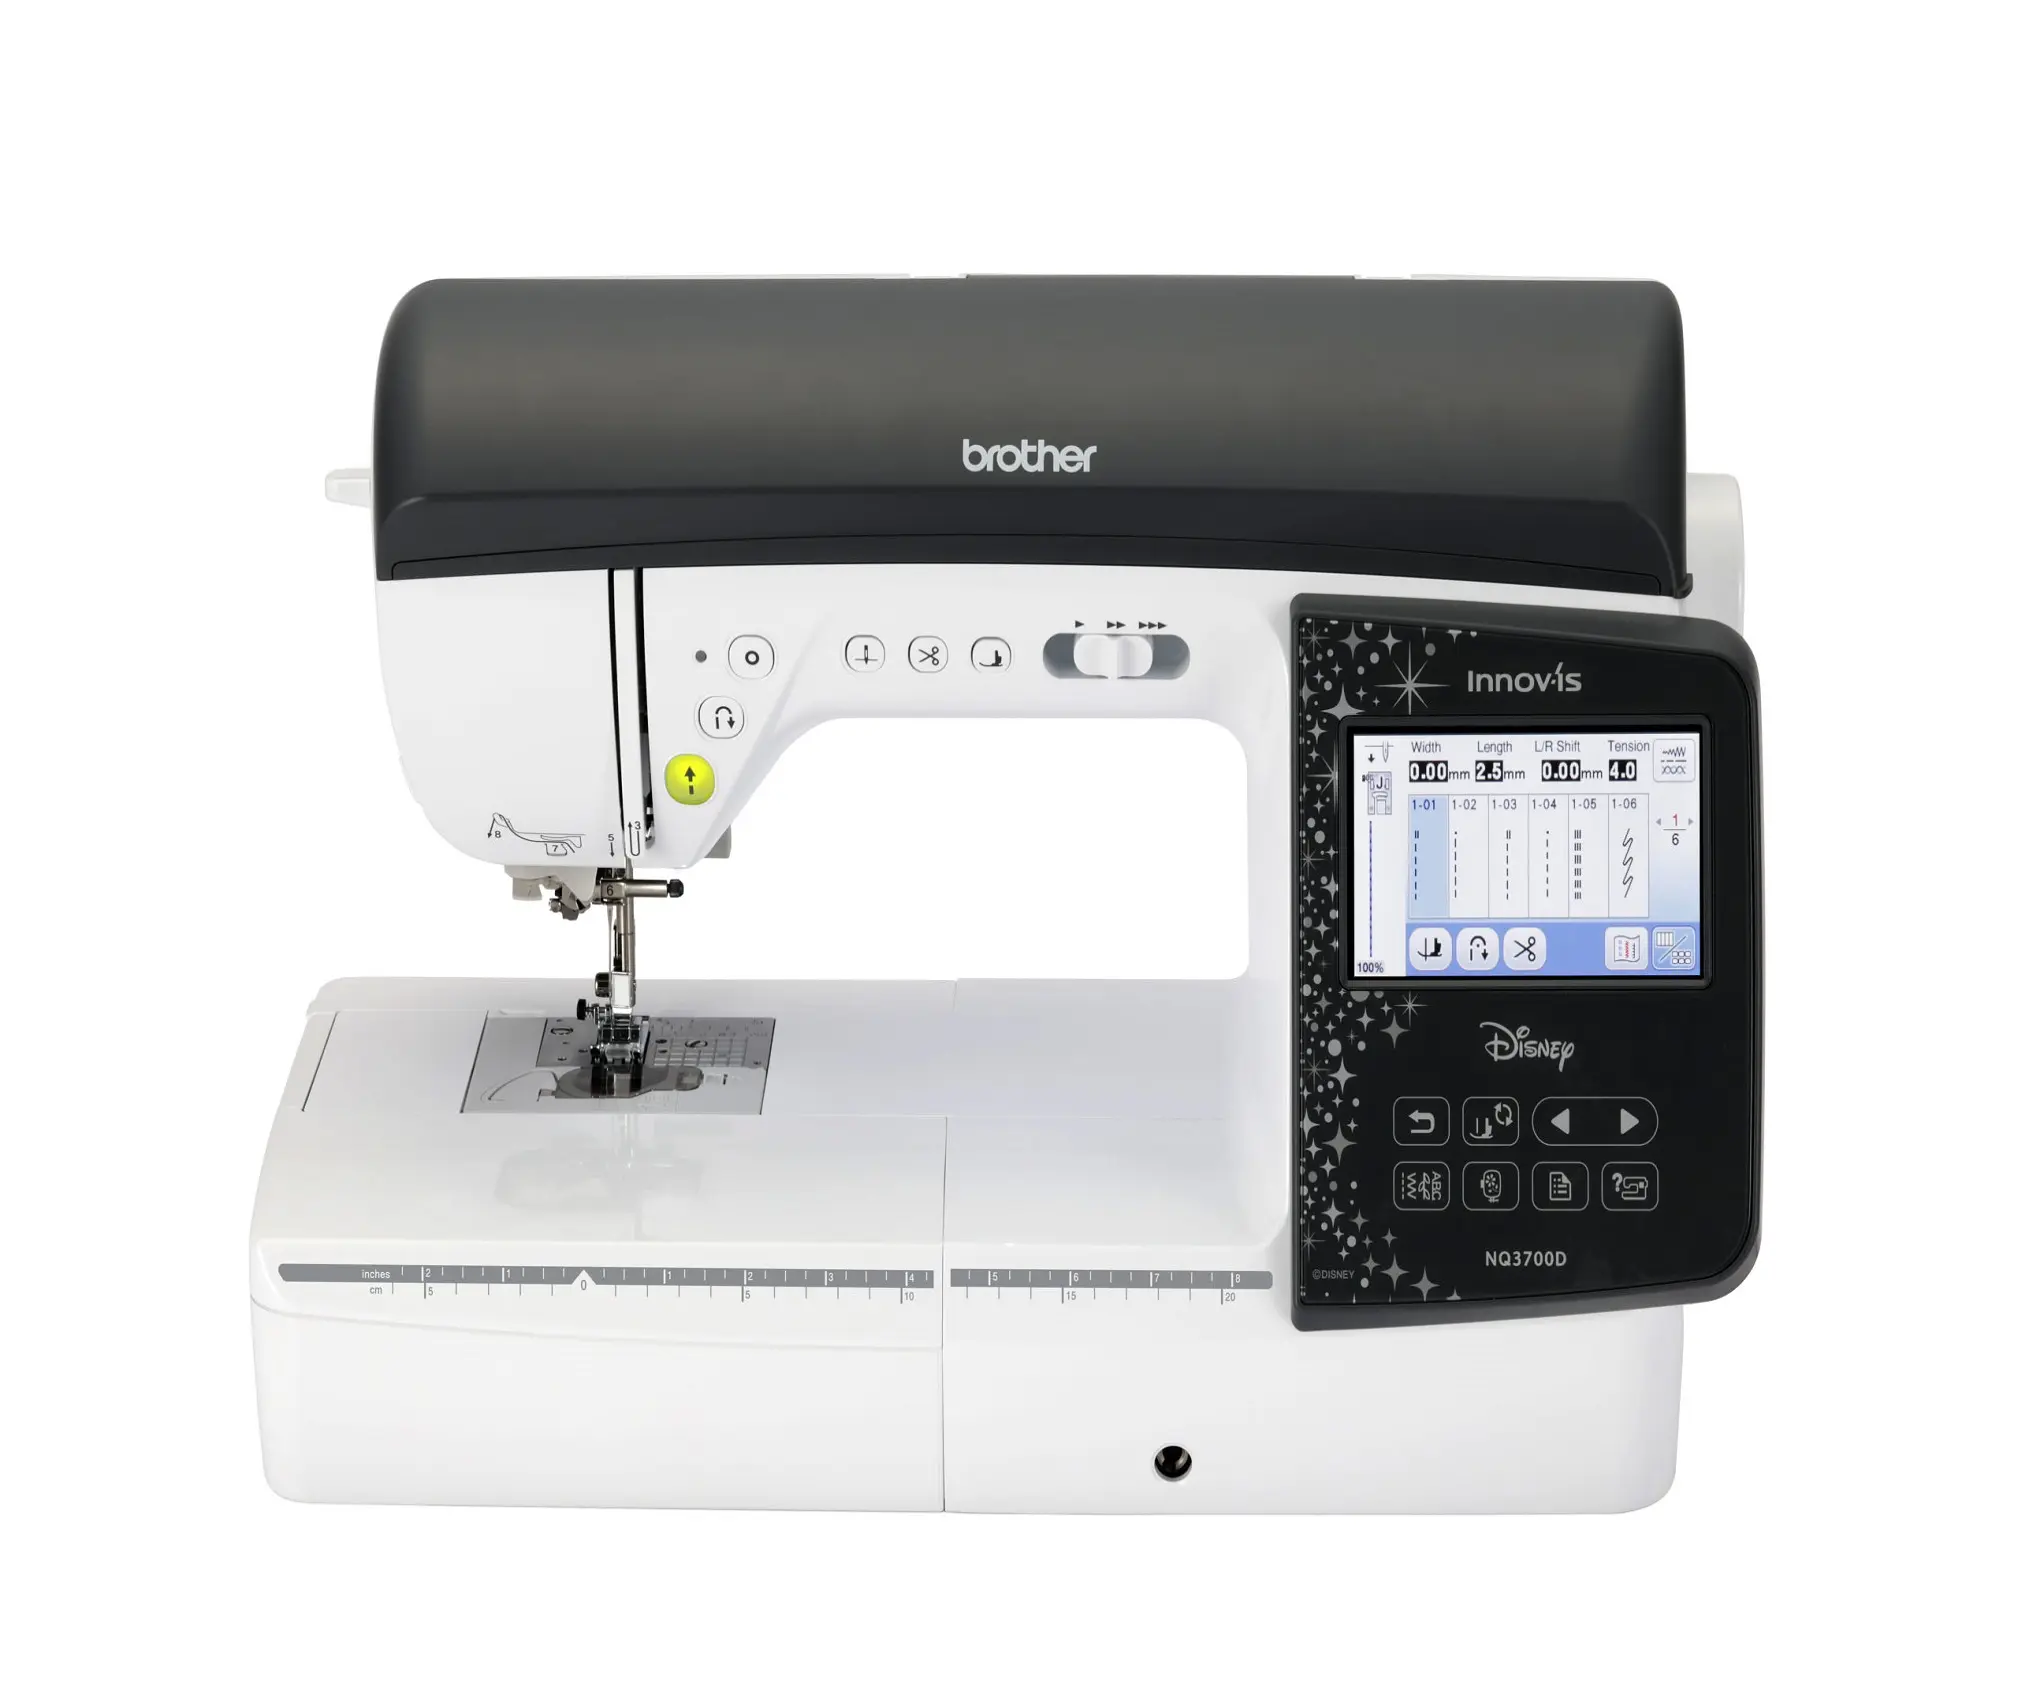 FAST SALES FOR FOR NEW Brother NQ3600D Combination Sewing Machine & Embroidery Home 233 Embroidery designs and 291 built